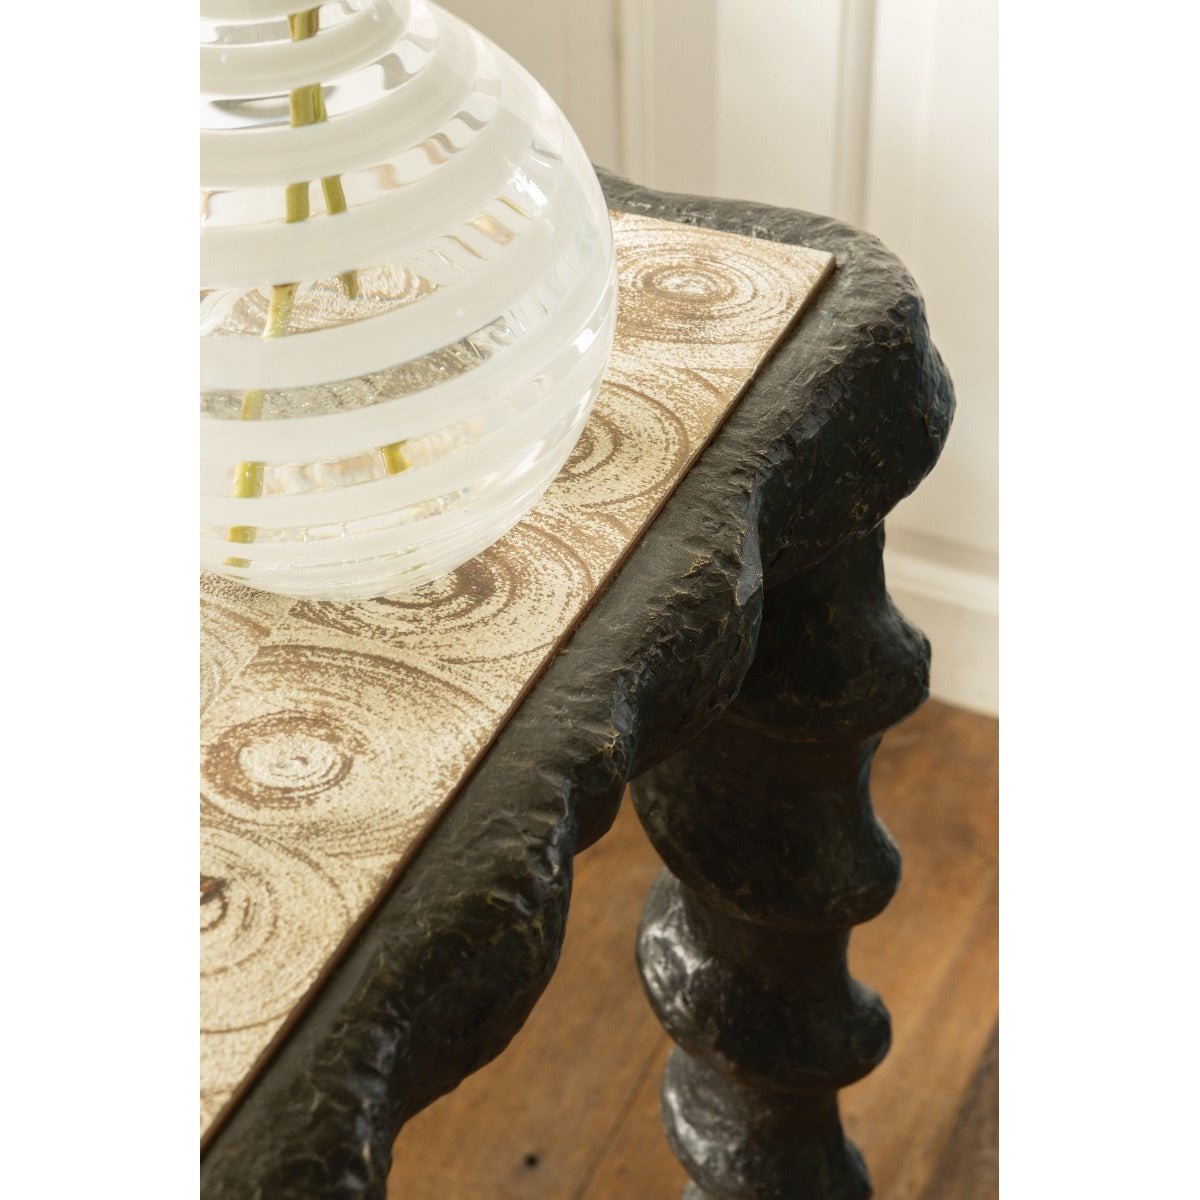 Karinta Console Bronzed Finish With White Oyster Top